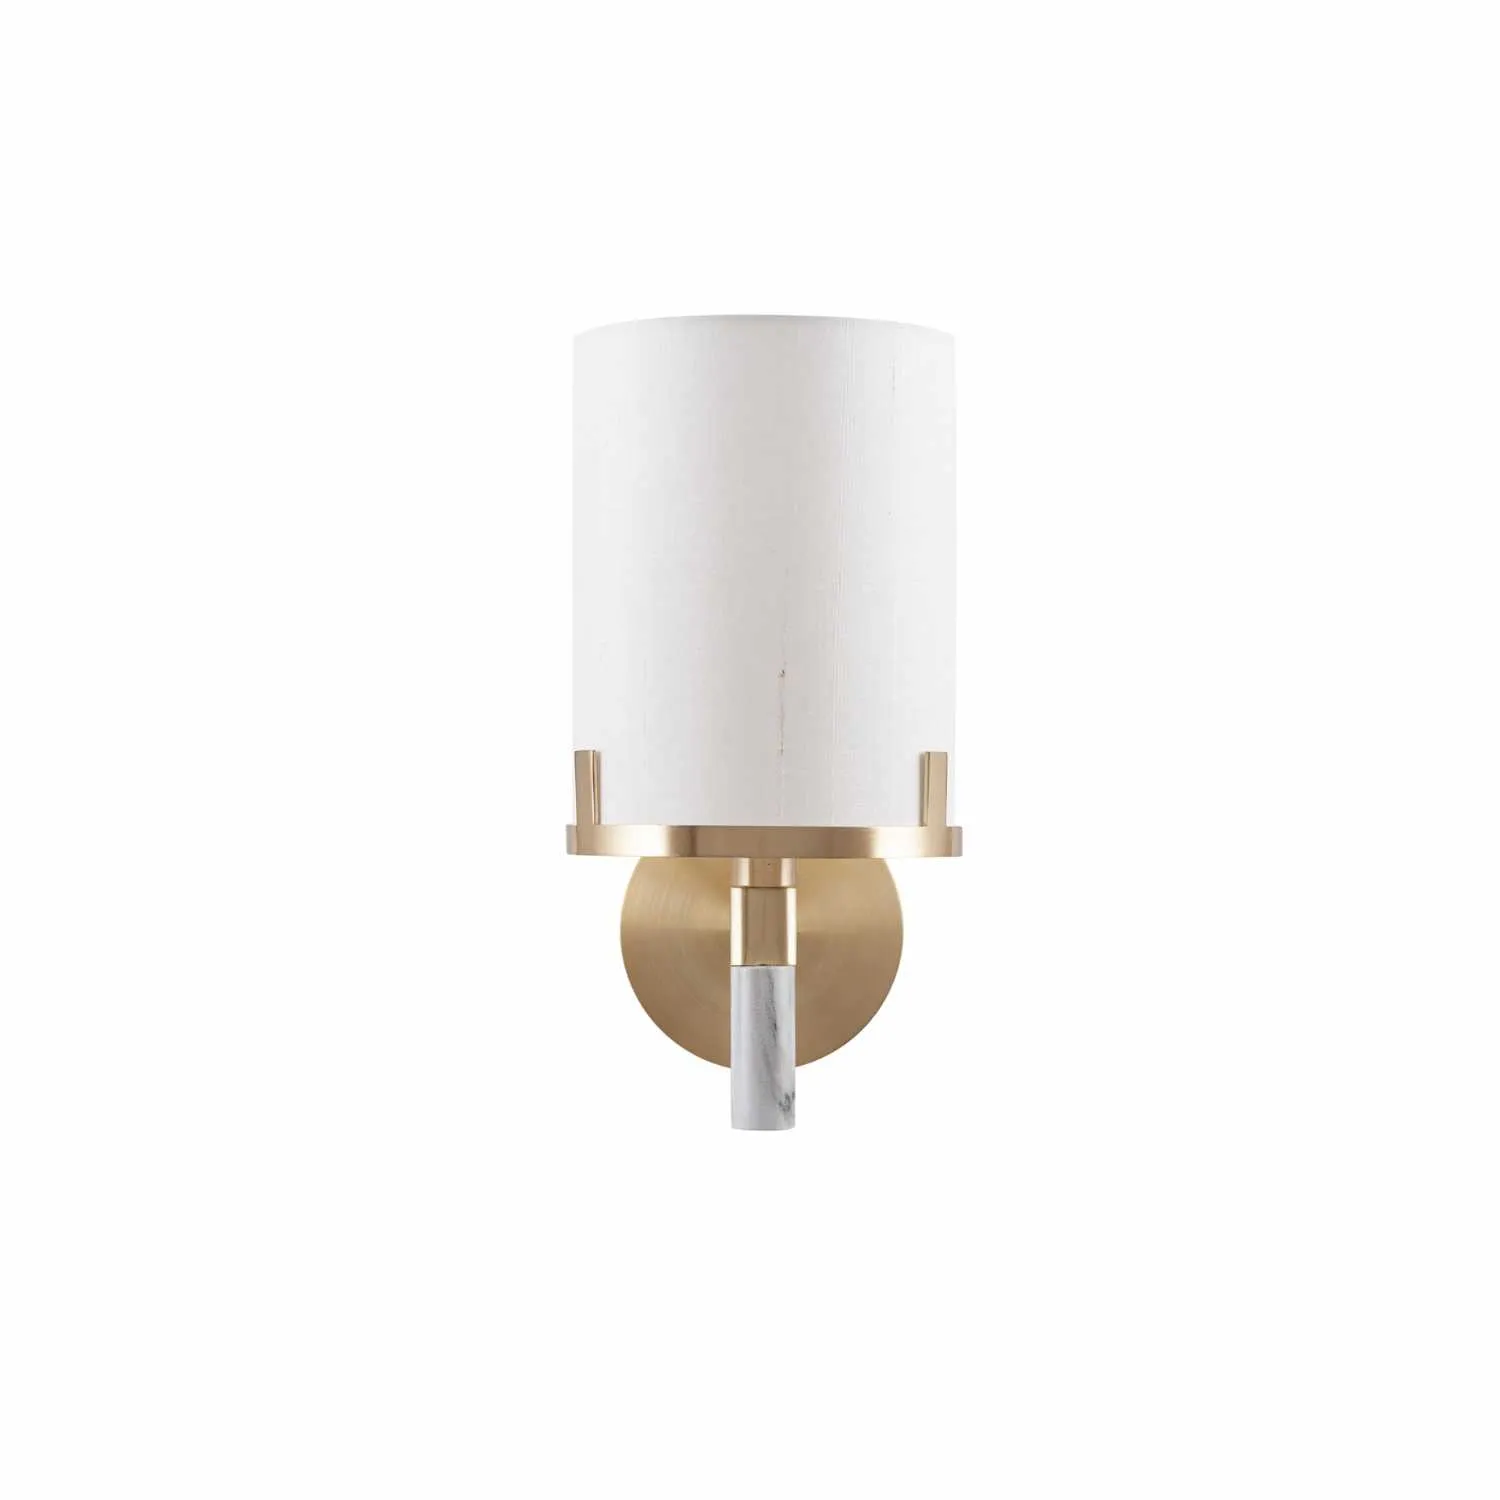 Champagne Gold Metal and Marble Effect Wall Light